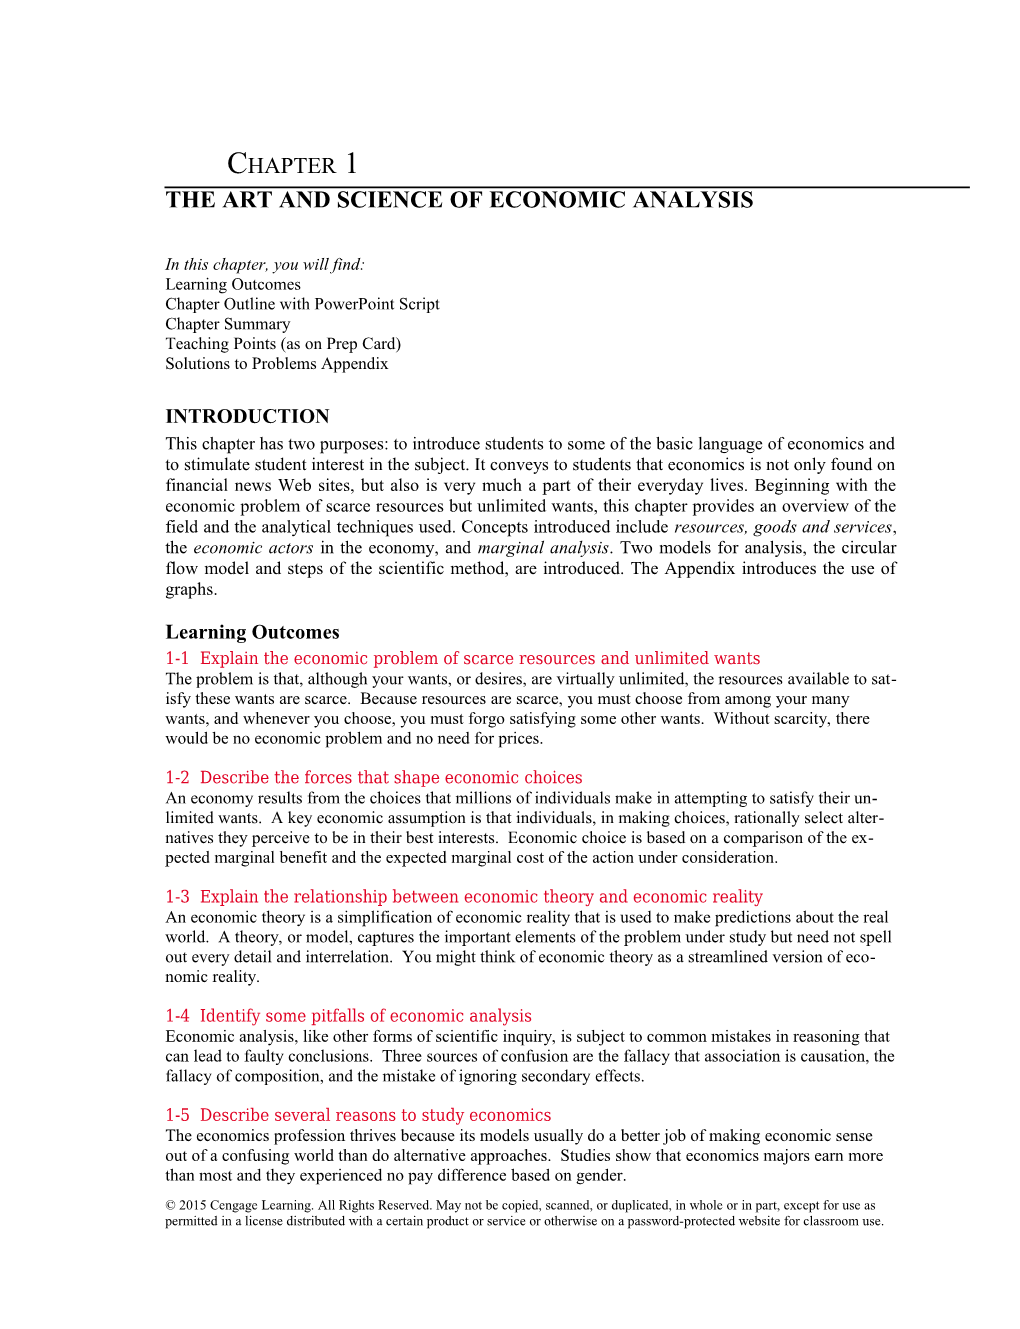 Chapter 1 the Art and Science of Economic Analysis 9